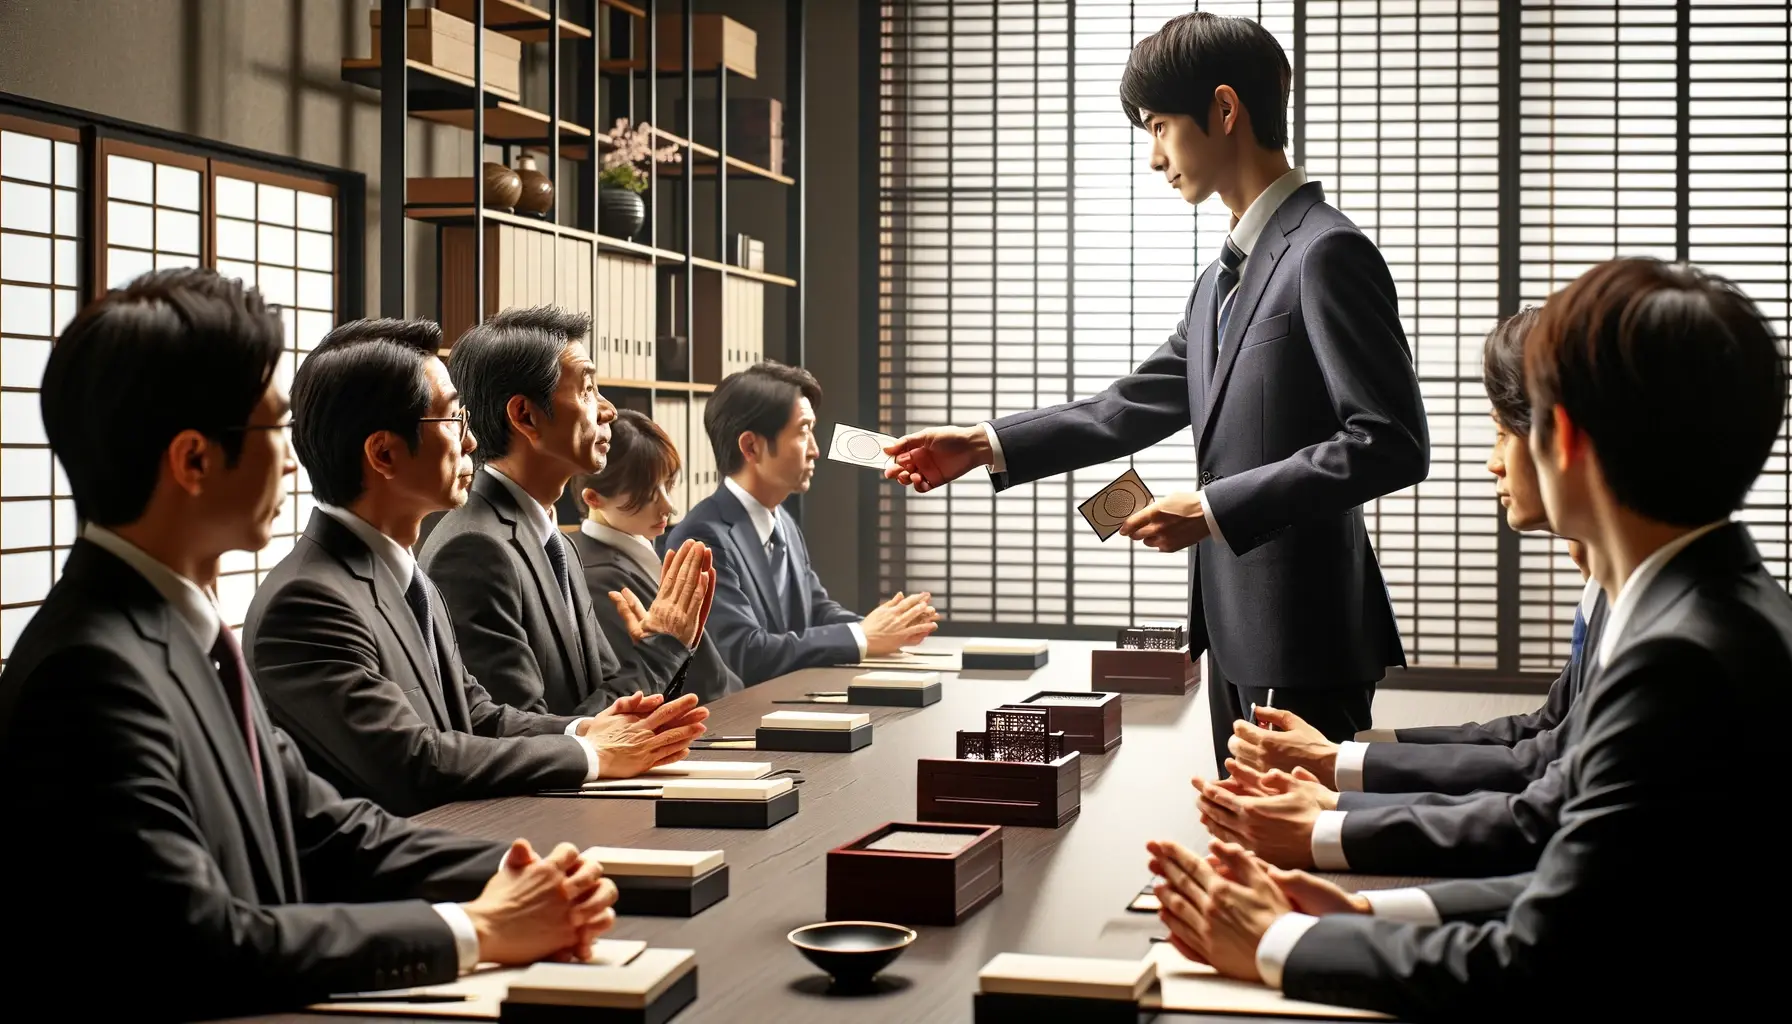 The image shows a Japanese business card exchange, emphasizing respect and hierarchy in a traditional office setting.